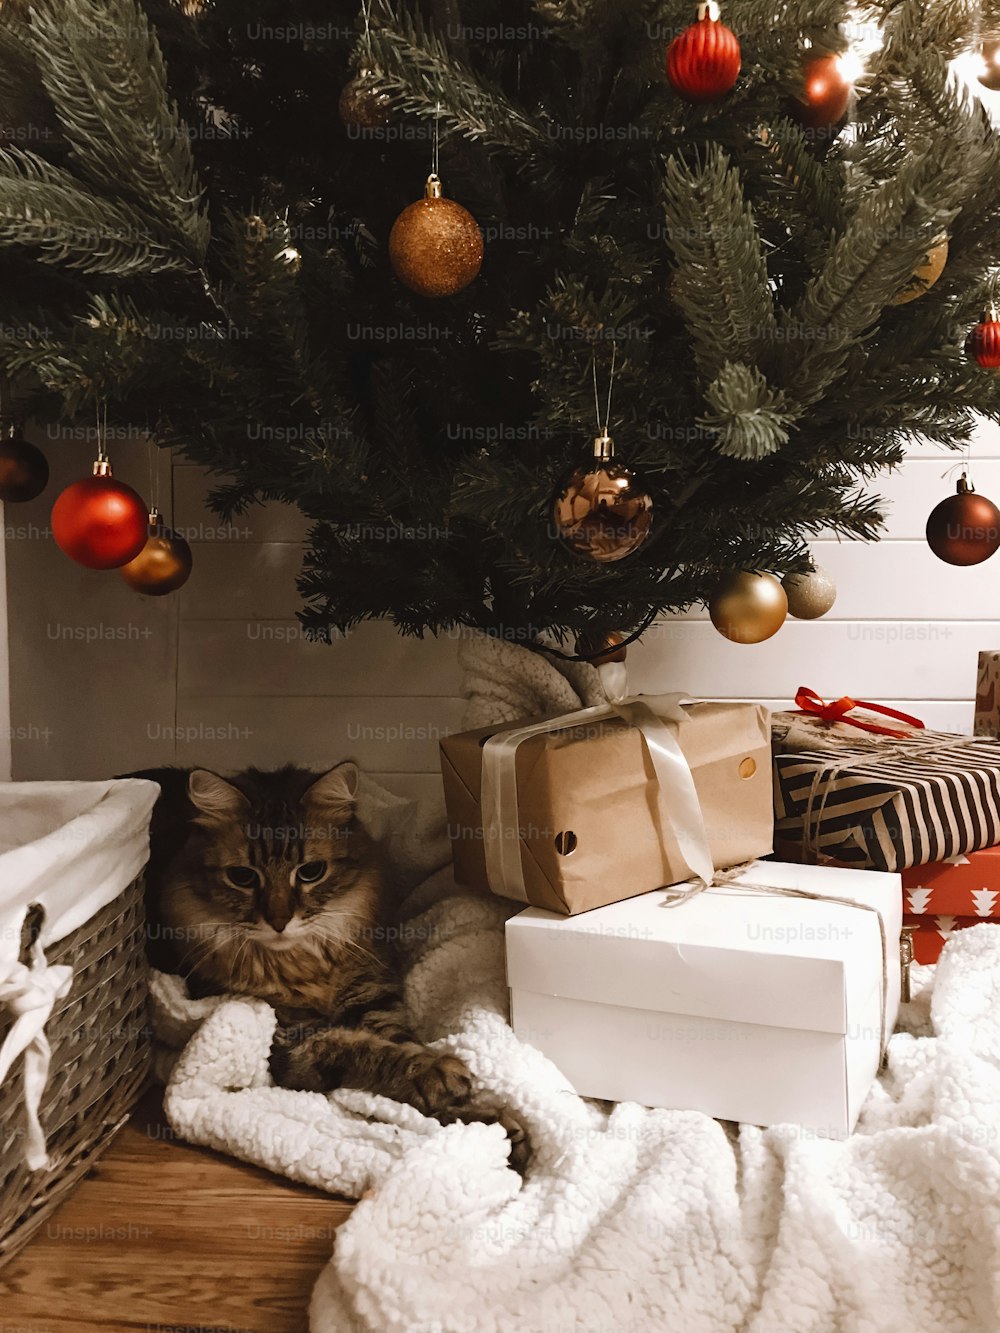 Cute tabby cat sitting with gifts under Christmas tree with red and gold baubles in festive room. Pet and holiday. Merry Christmas